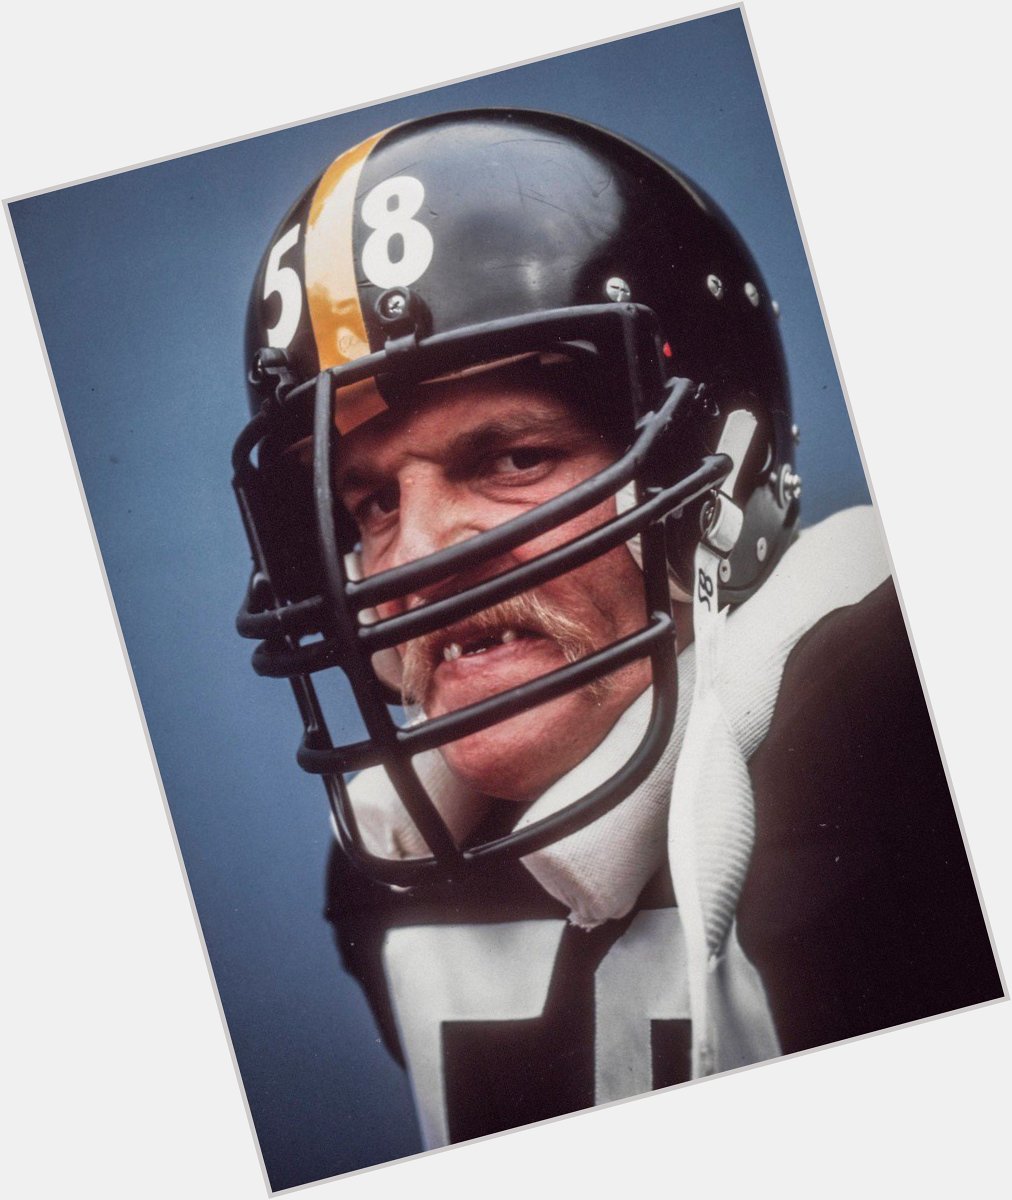 Happy Birthday to one of the greatest Steelers of all-time Jack Lambert !!  